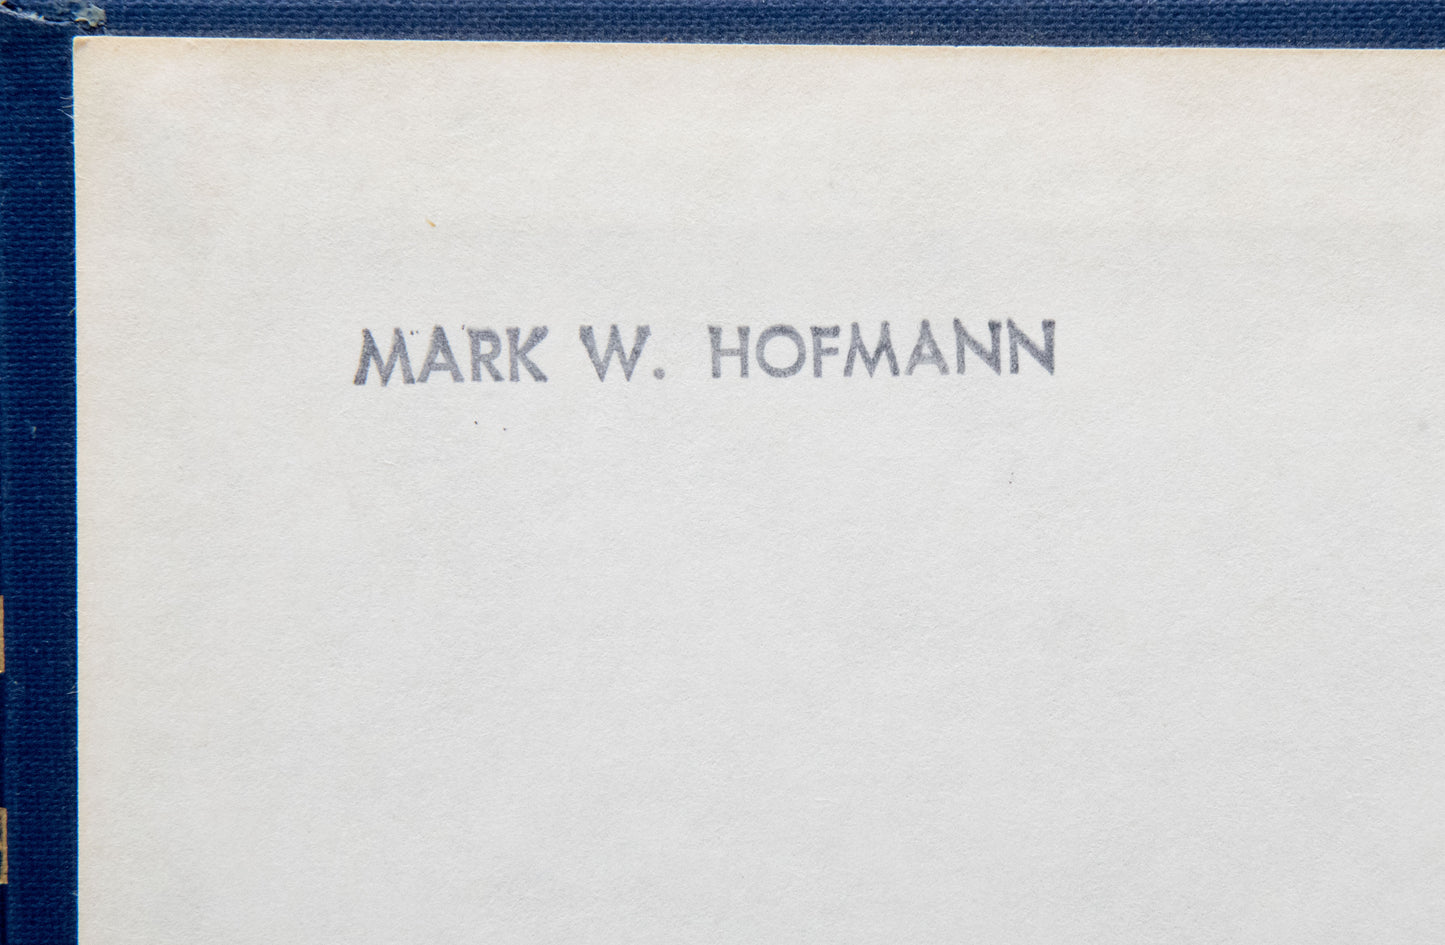 Hofmann, Mark - Personal Copy - 7 Part Edition of The History of The Church